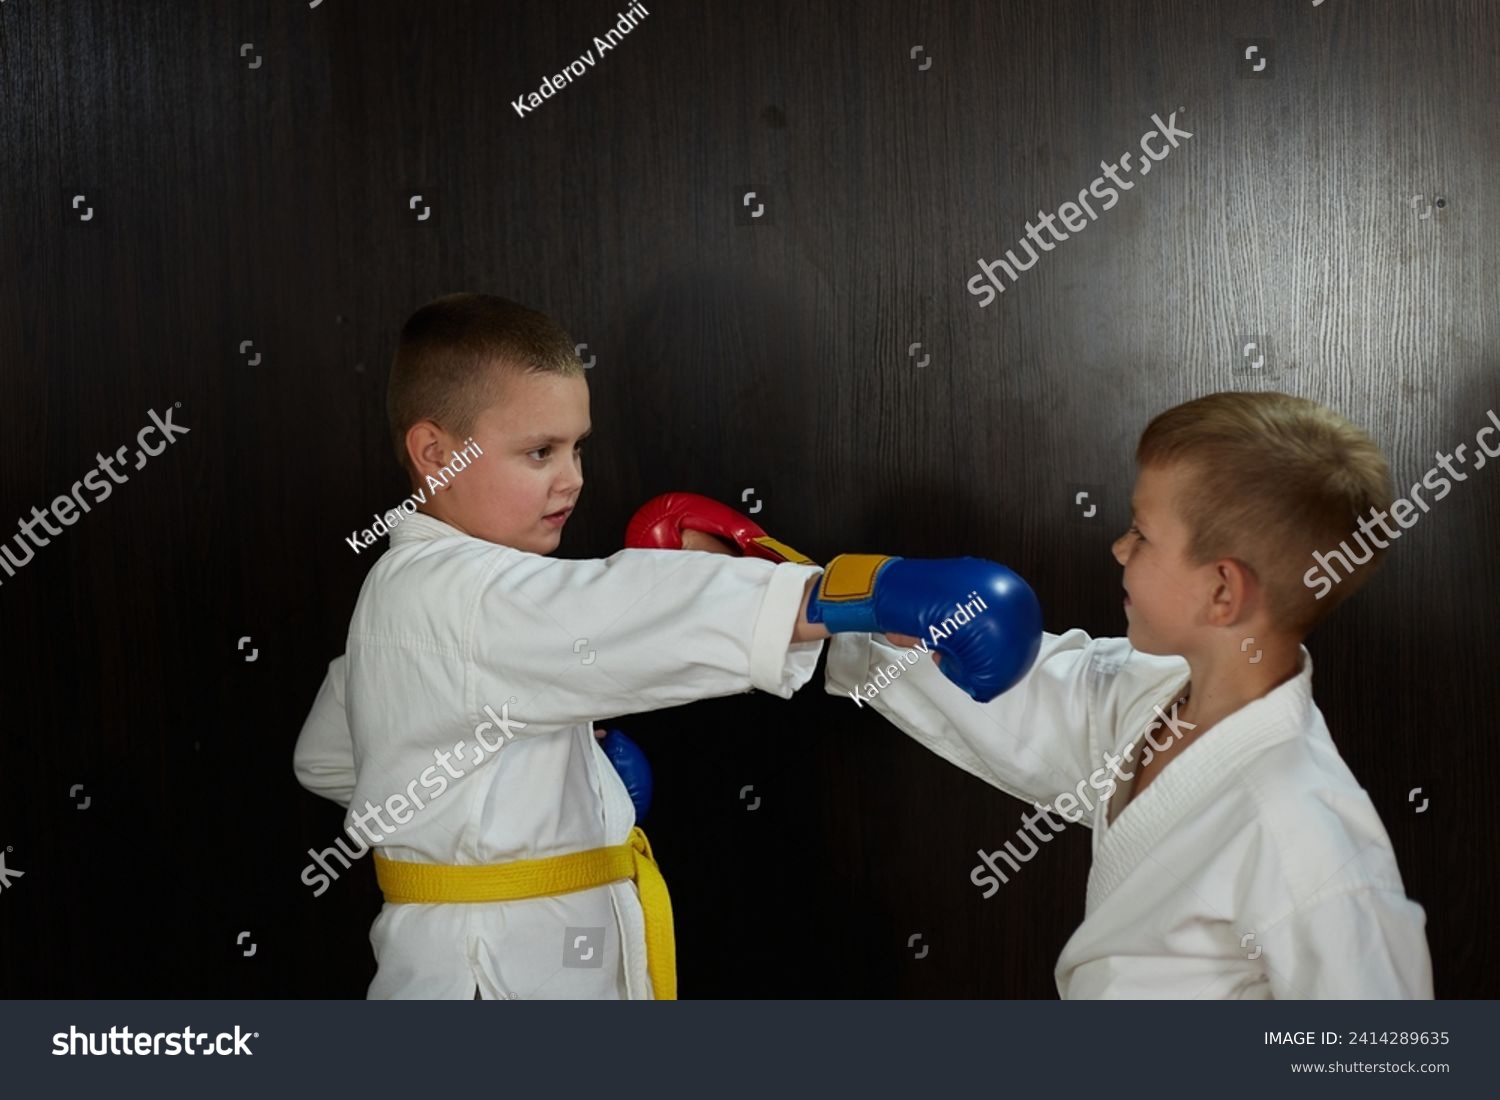 Two athlete boys in karategi with red and blue pads on their hands perform punches towards each other #2414289635